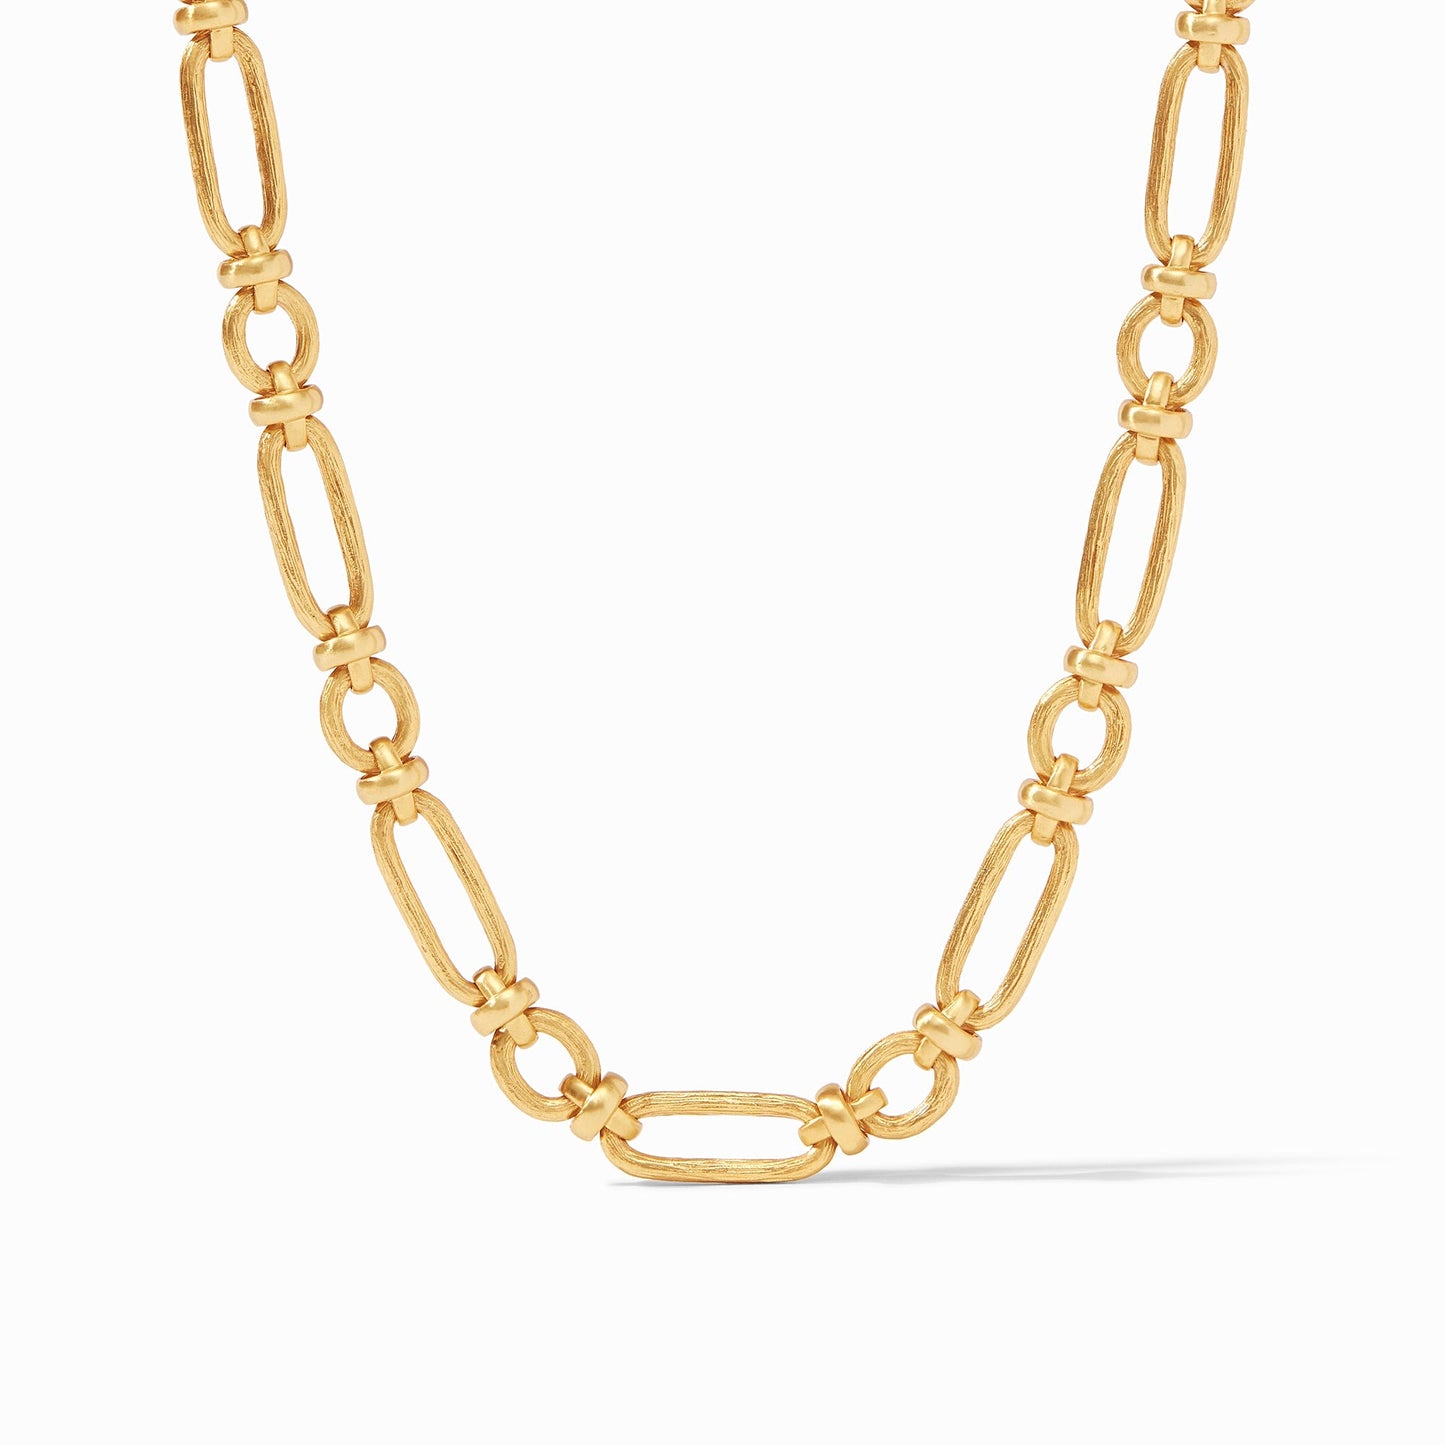 Ivy Link Necklace - Gaines Jewelers